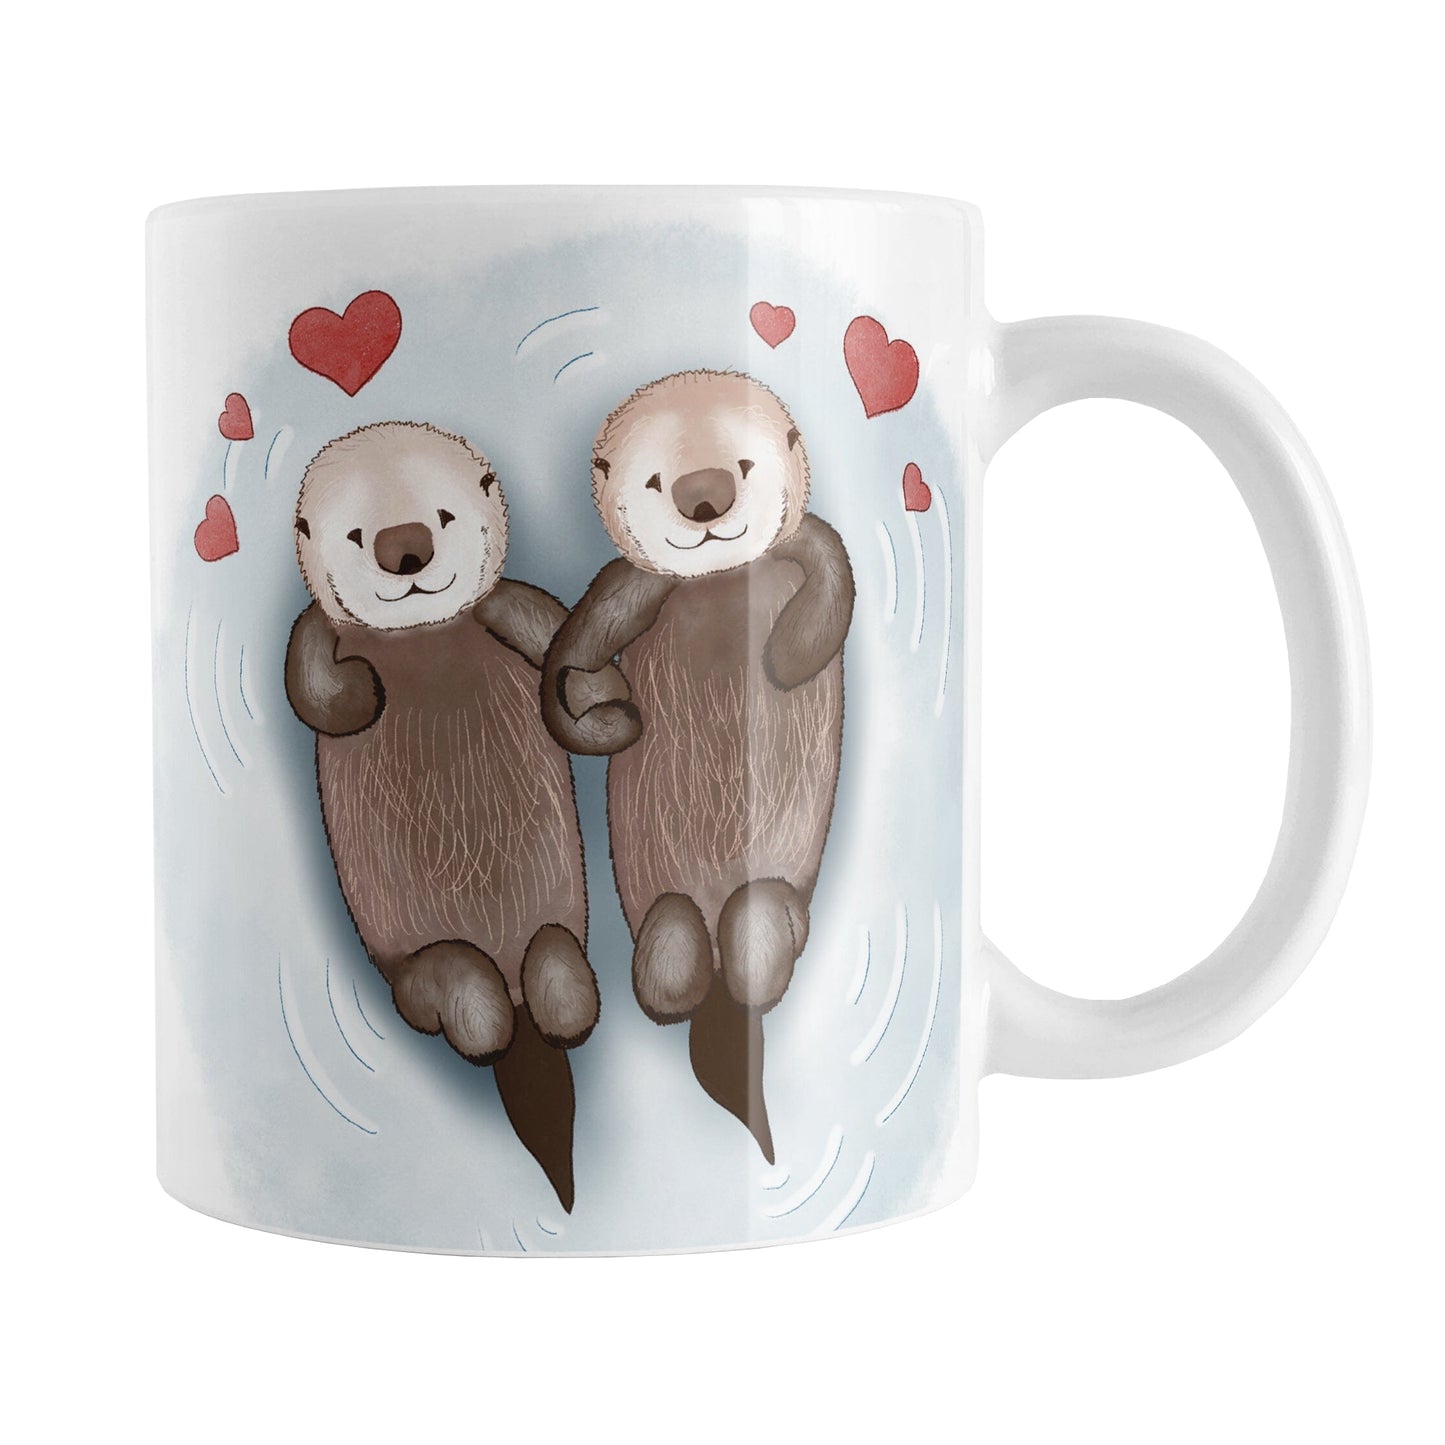 Floating Otters in Love Mug (11oz) at Amy's Coffee Mugs. A ceramic coffee mug designed with a hand-drawn illustration of two cute otters floating in the water, holding hands in love, with red hearts above them. This adorable drawing is on both sides of the mug.